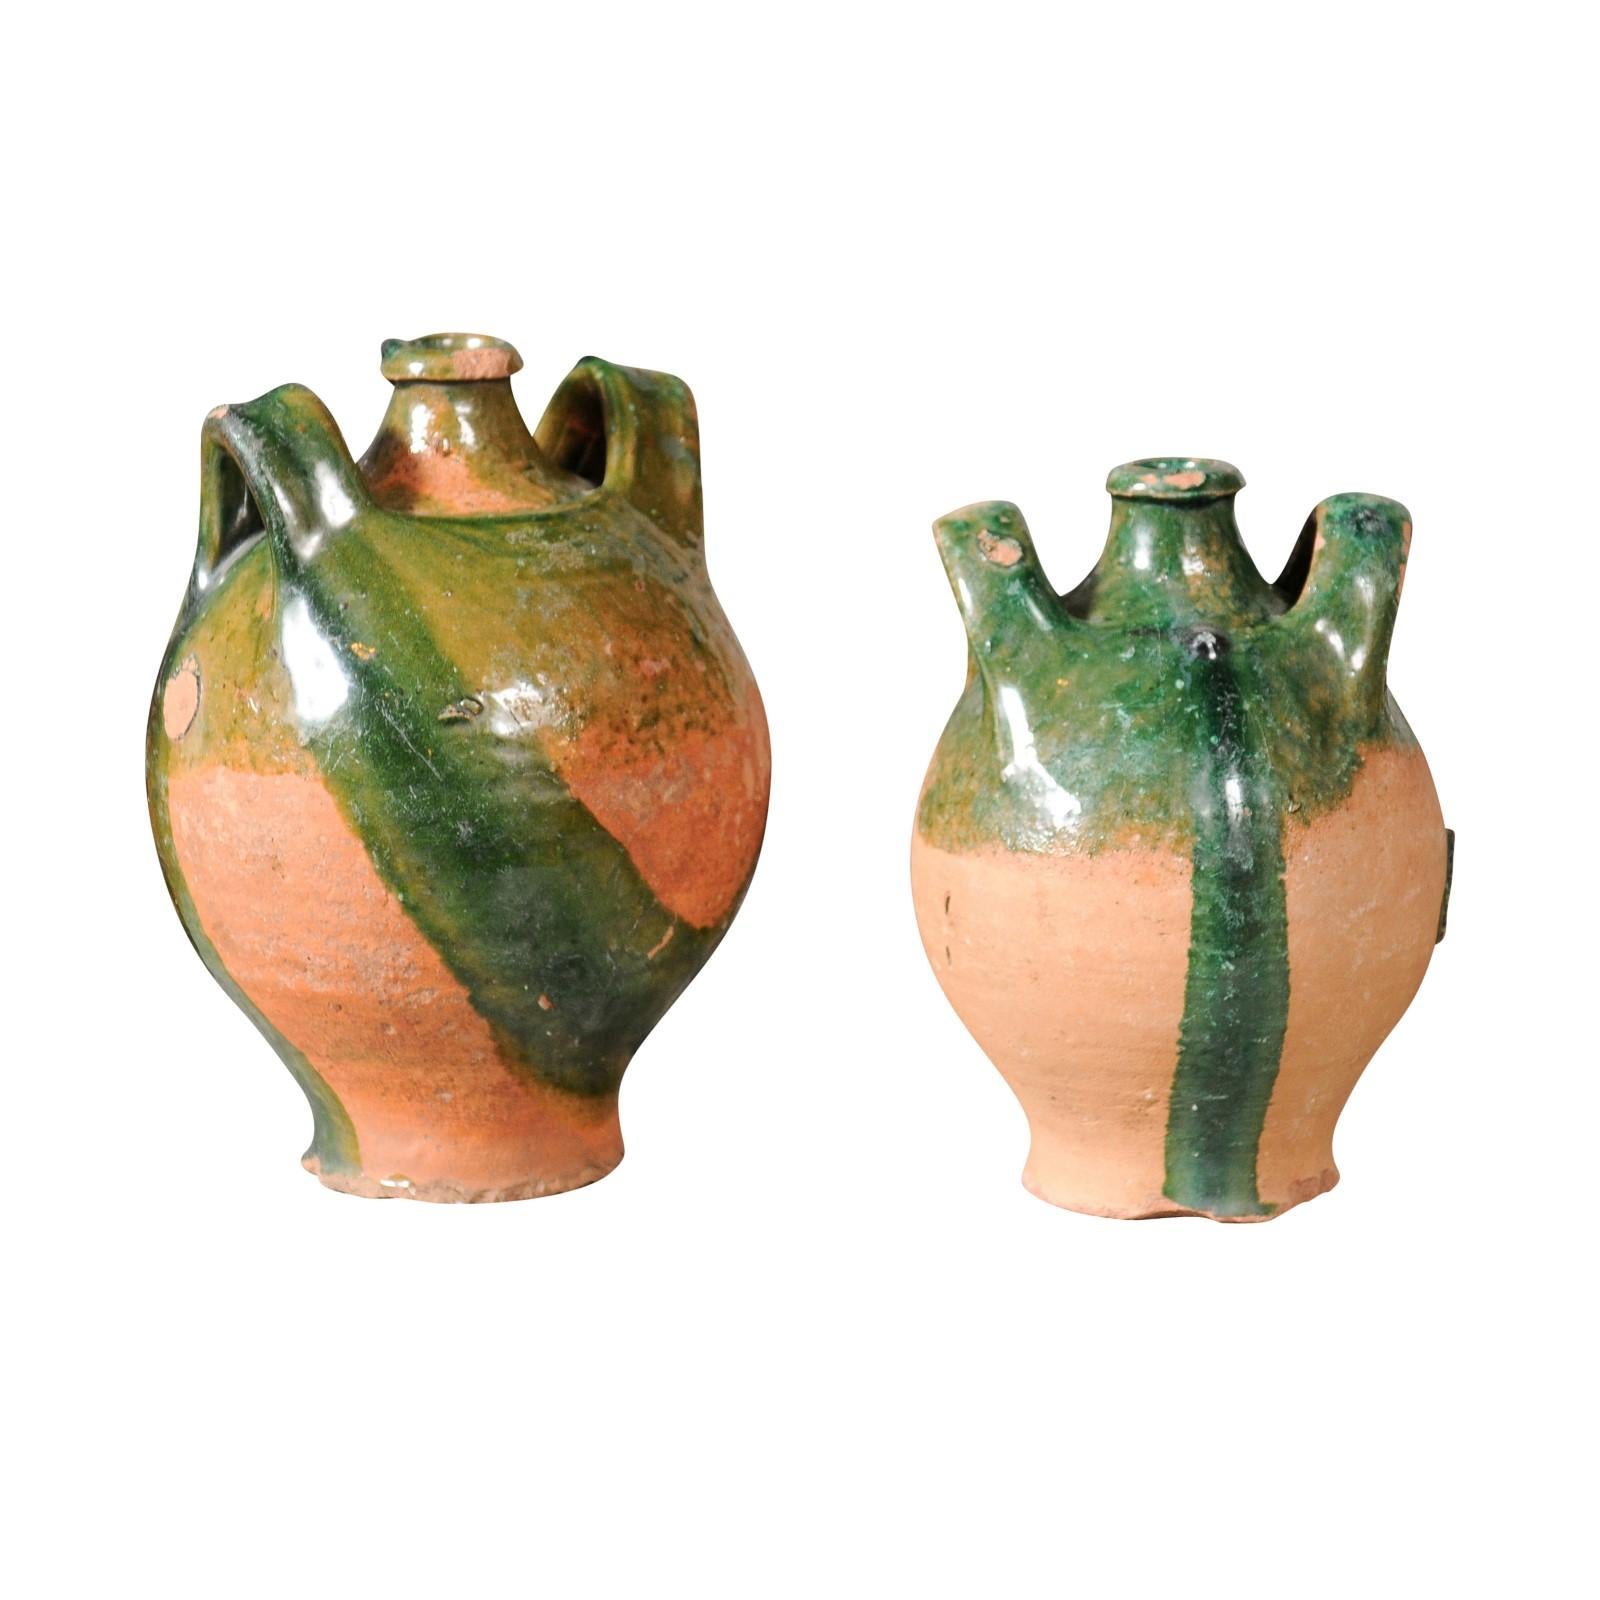 Two French Provincial Napoléon III period pottery jugs from circa 1850 with green glaze, dripping and lateral handles flanking the central spout. They are priced and sold individually. A pair of French Provincial Napoléon III period pottery jugs